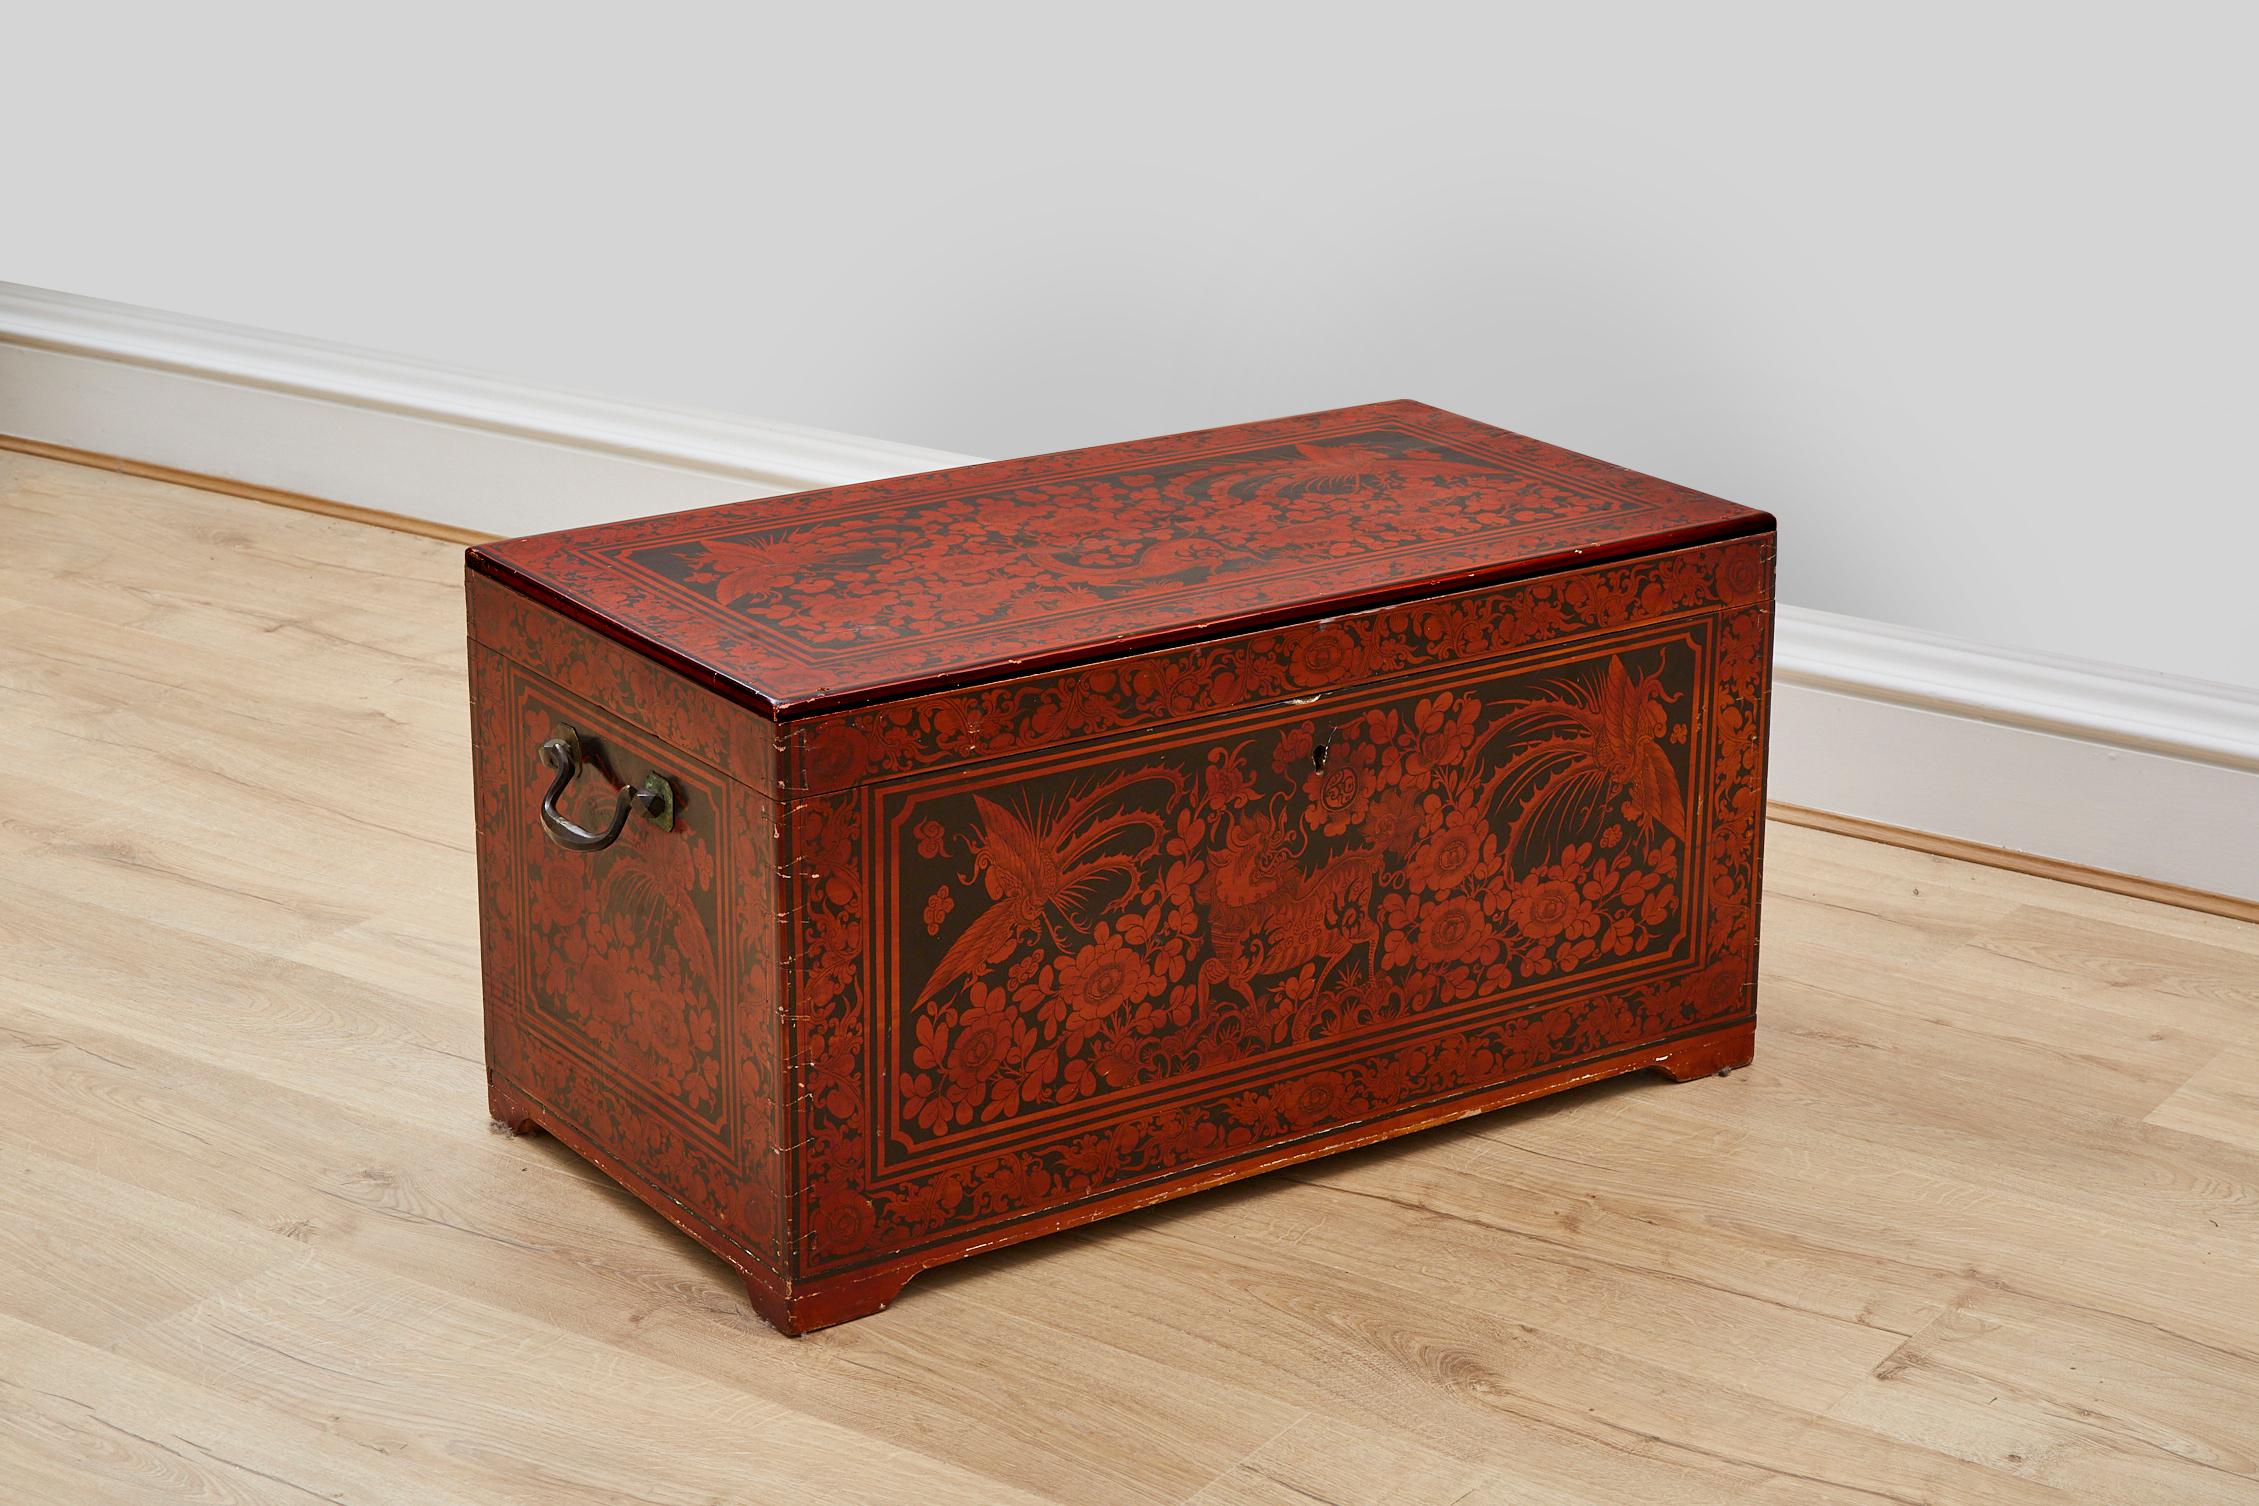 Mid-Century Modern Red Lacquered Painted Chinese Trunk with Compartments and Counters Early 20th C.